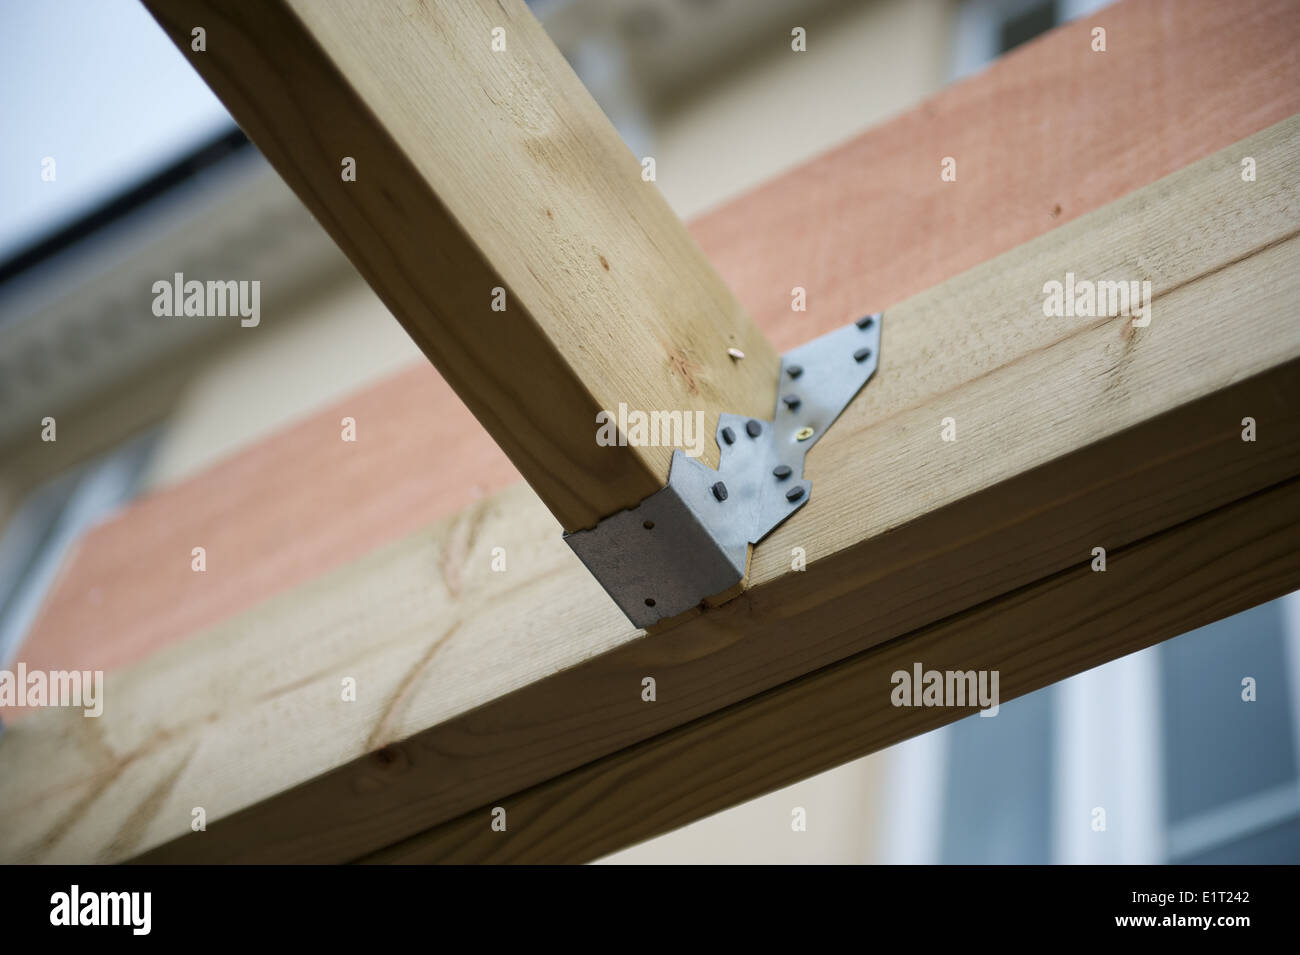 Roof trusses extension construction building project Stock Photo